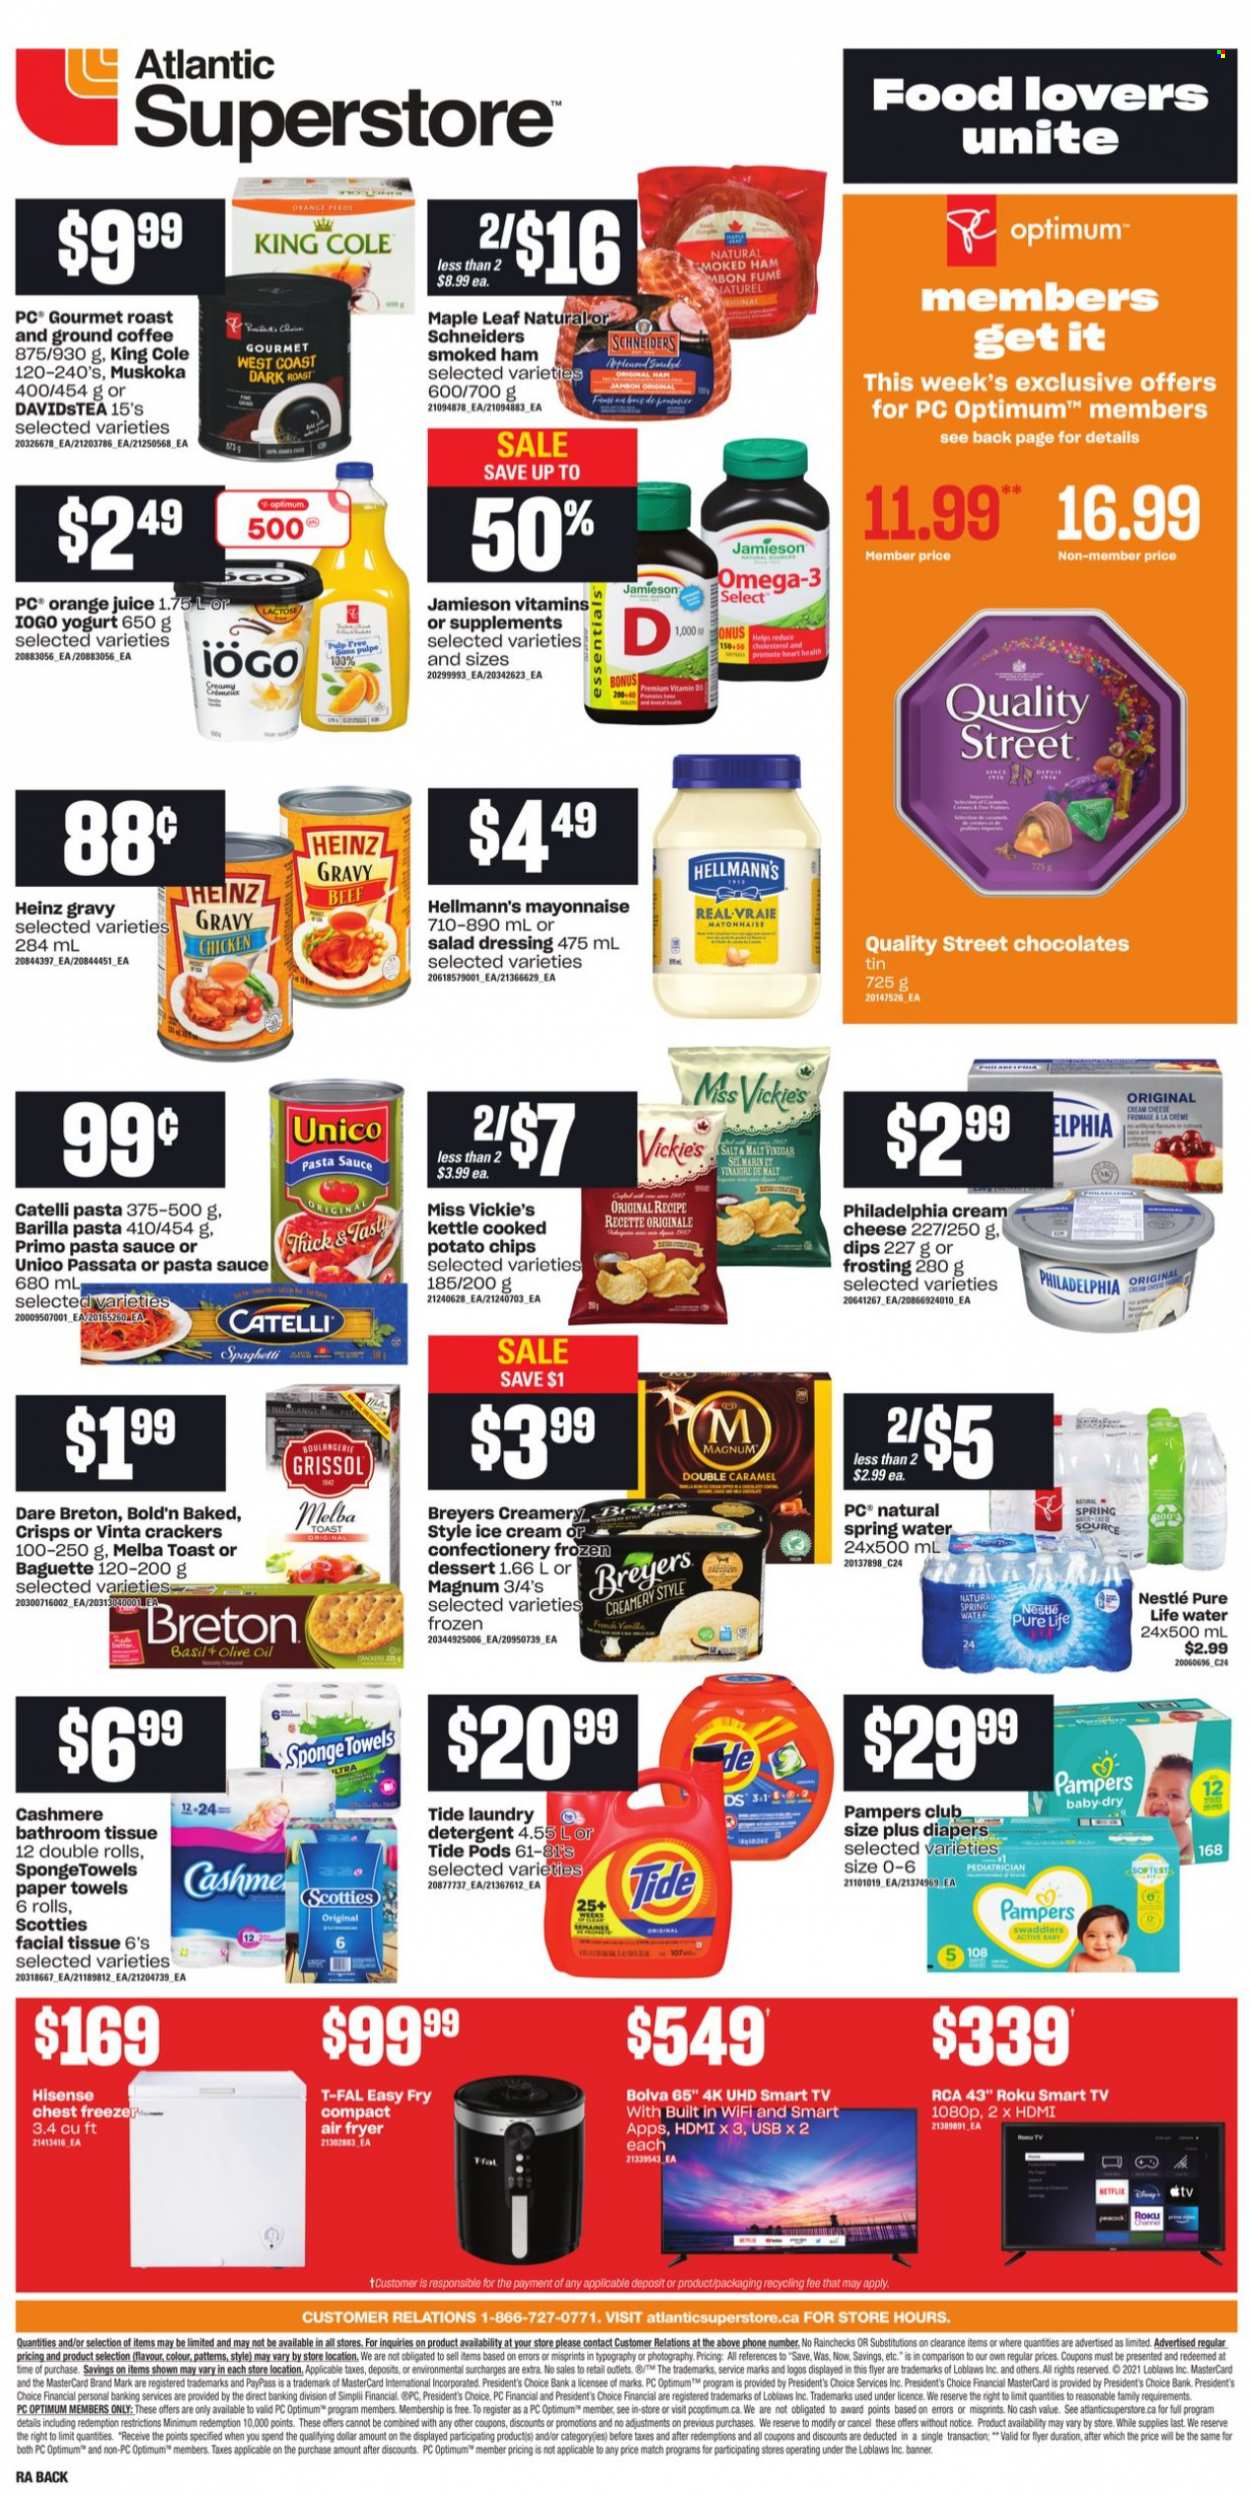 thumbnail - Atlantic Superstore Flyer - September 30, 2021 - October 06, 2021 - Sales products - spaghetti, pasta sauce, Barilla, ham, smoked ham, cream cheese, Président, yoghurt, mayonnaise, Hellmann’s, Magnum, ice cream, crackers, potato chips, frosting, Heinz, esponja, salad dressing, dressing, olive oil, oil, orange juice, juice, spring water, Pure Life Water, coffee, ground coffee, nappies, bath tissue, kitchen towels, paper towels, Tide, laundry detergent, Optimum, Omega-3, vitamin D3, Nestlé, baguette, detergent, Philadelphia, Pampers. Page 2.